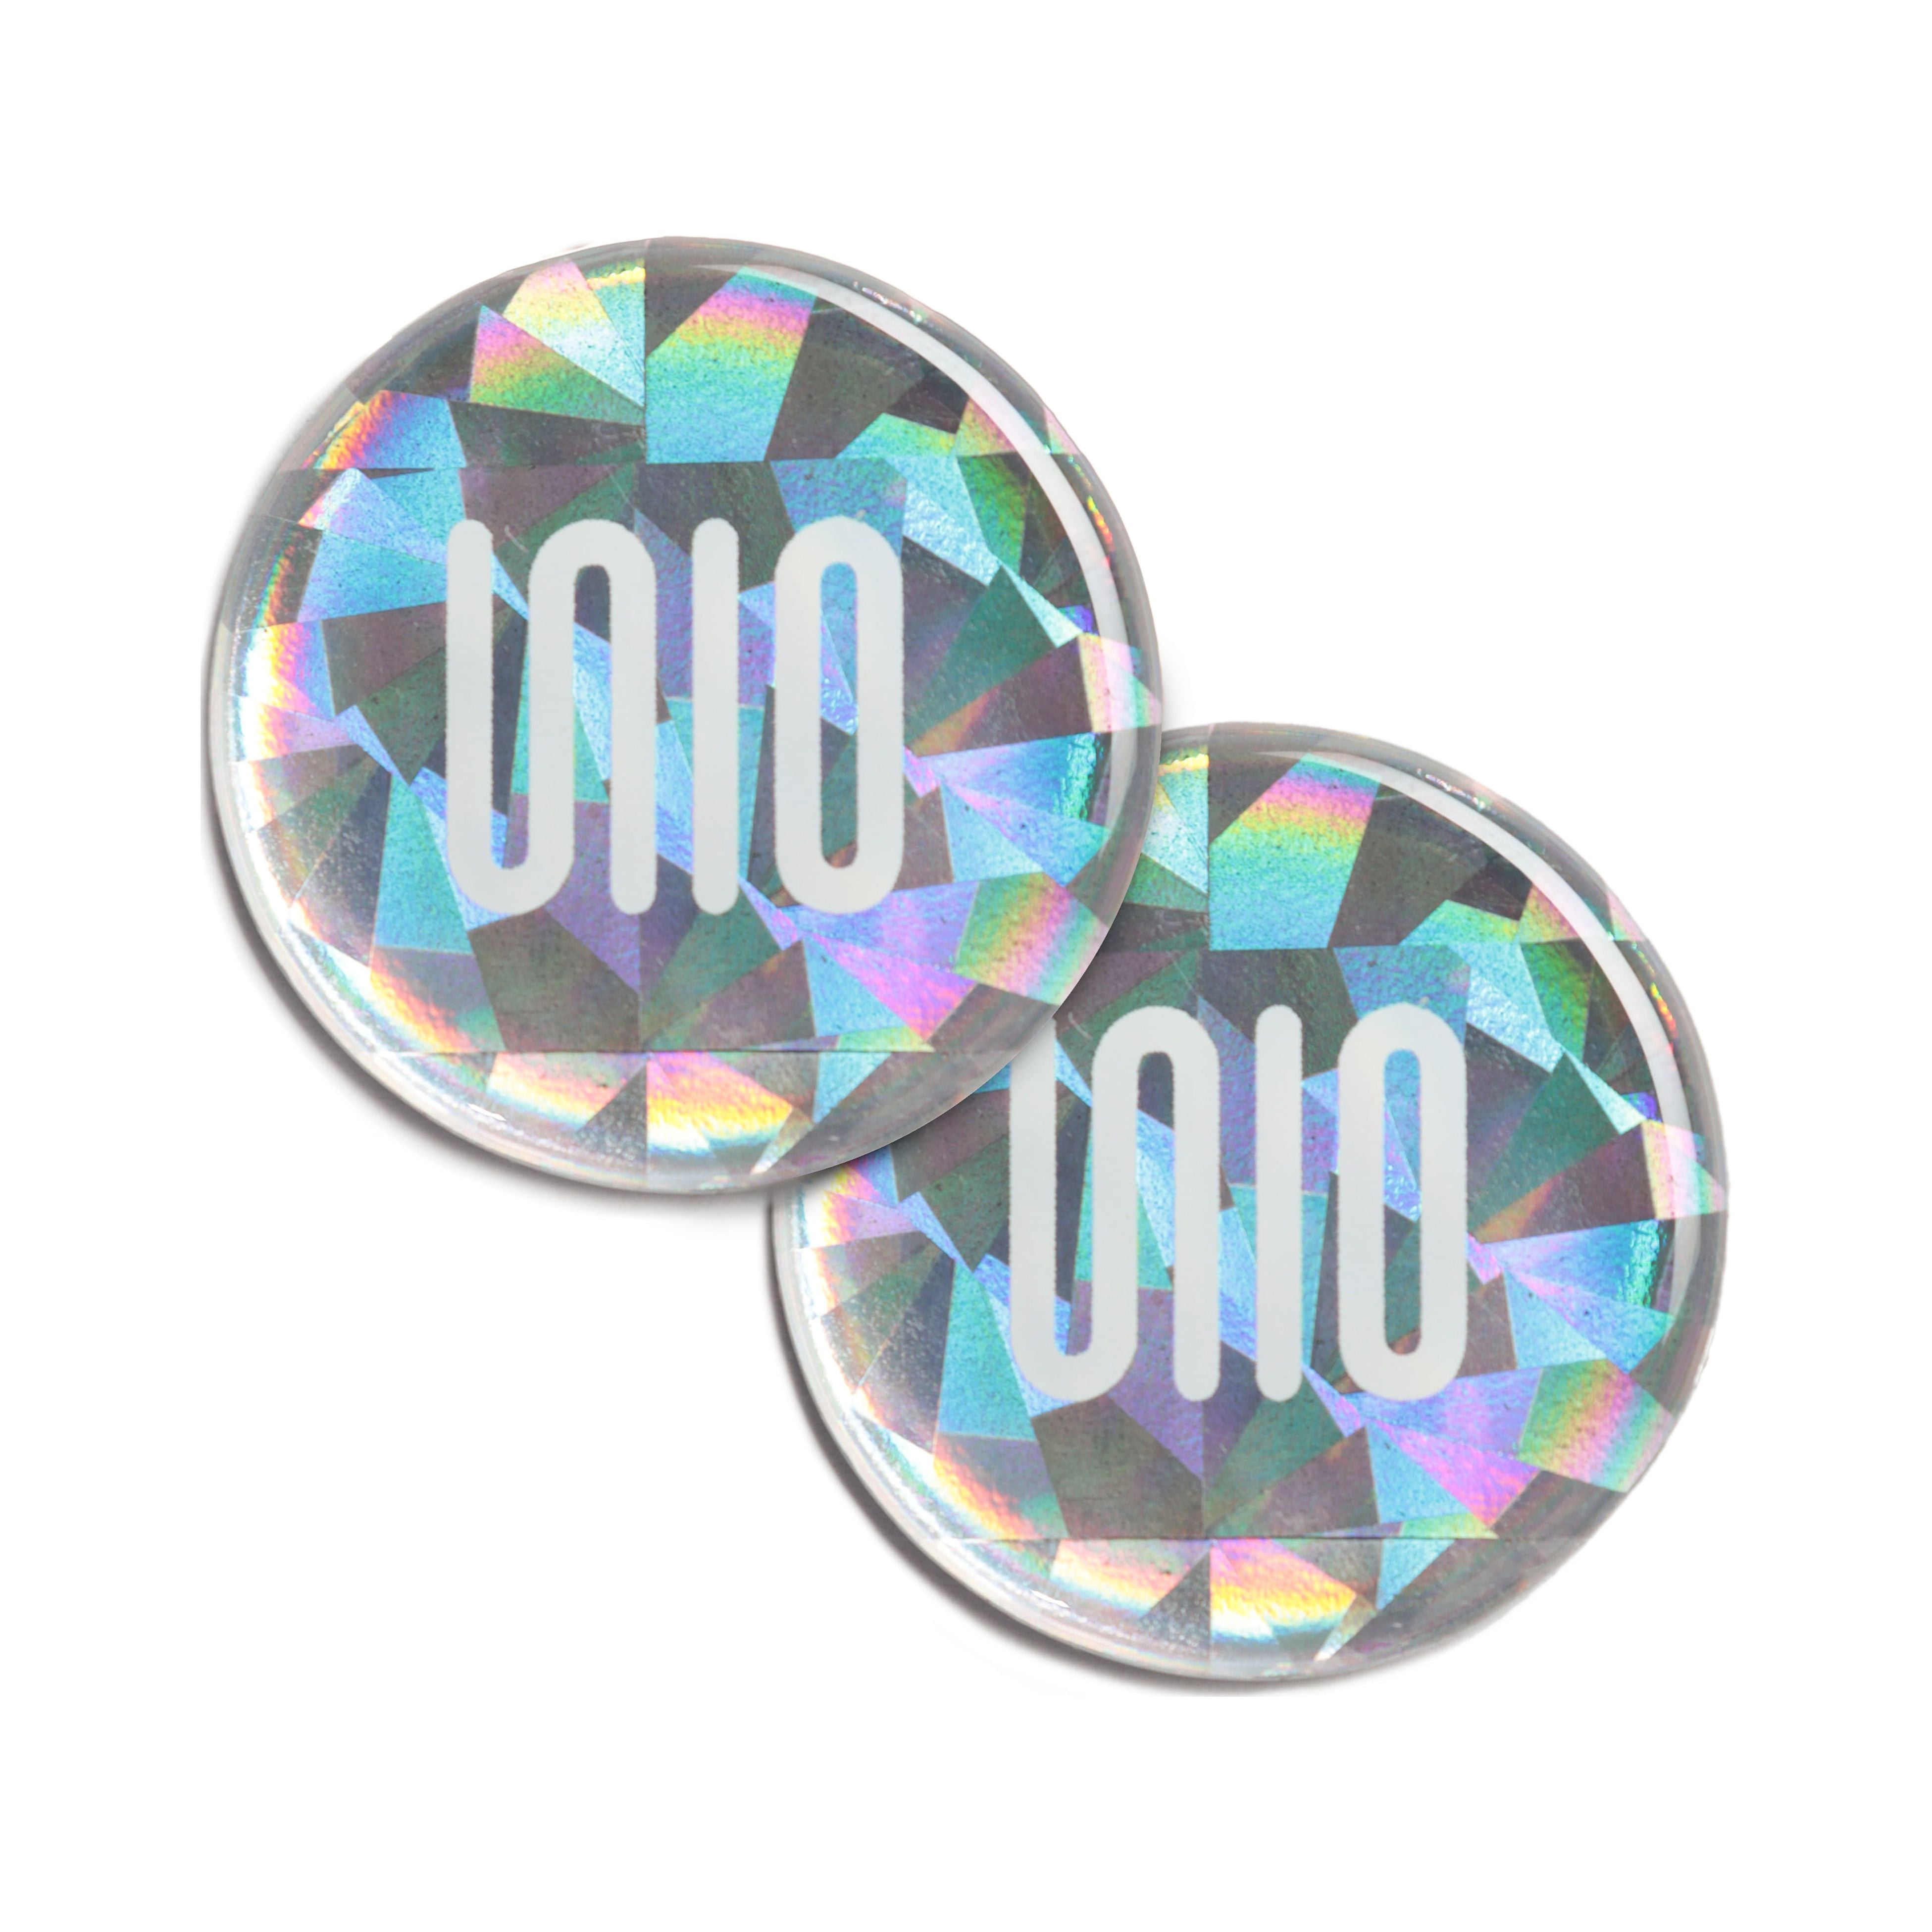 UNIO NFC Tag, Digital Information Sharing and Phone Accessory